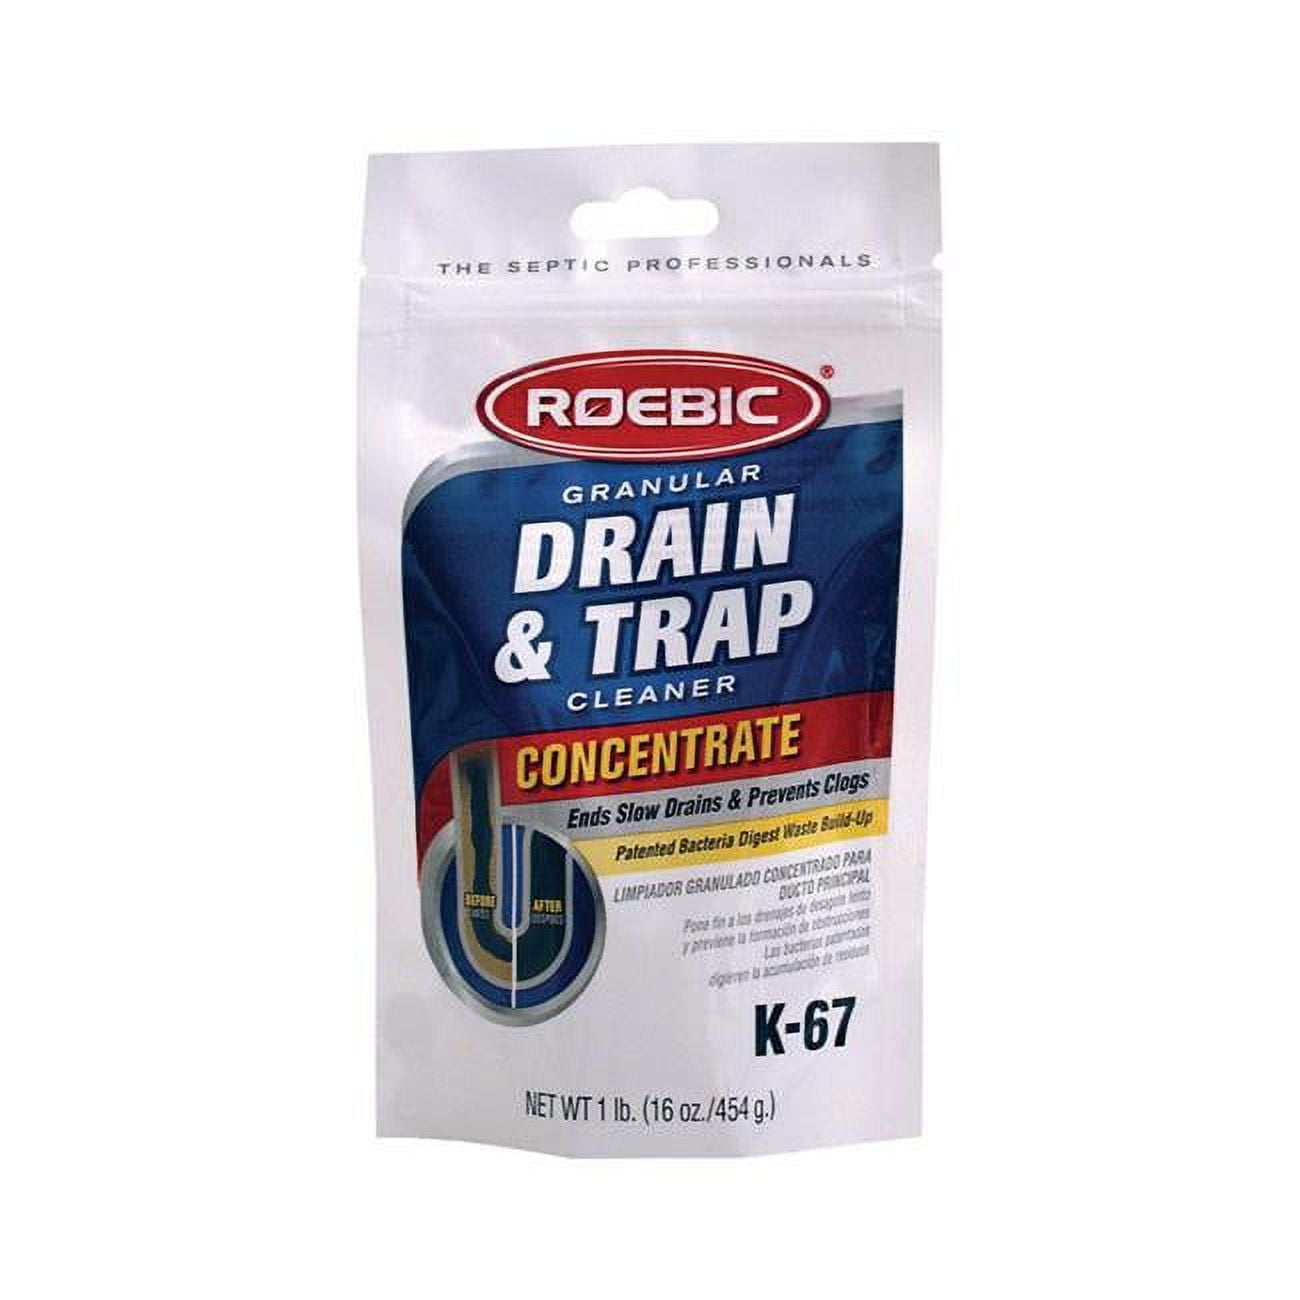 4495693 16 oz Crystals Drain & Trap Cleaner - Pack of 12 -  ROEBIC LABORATORIES